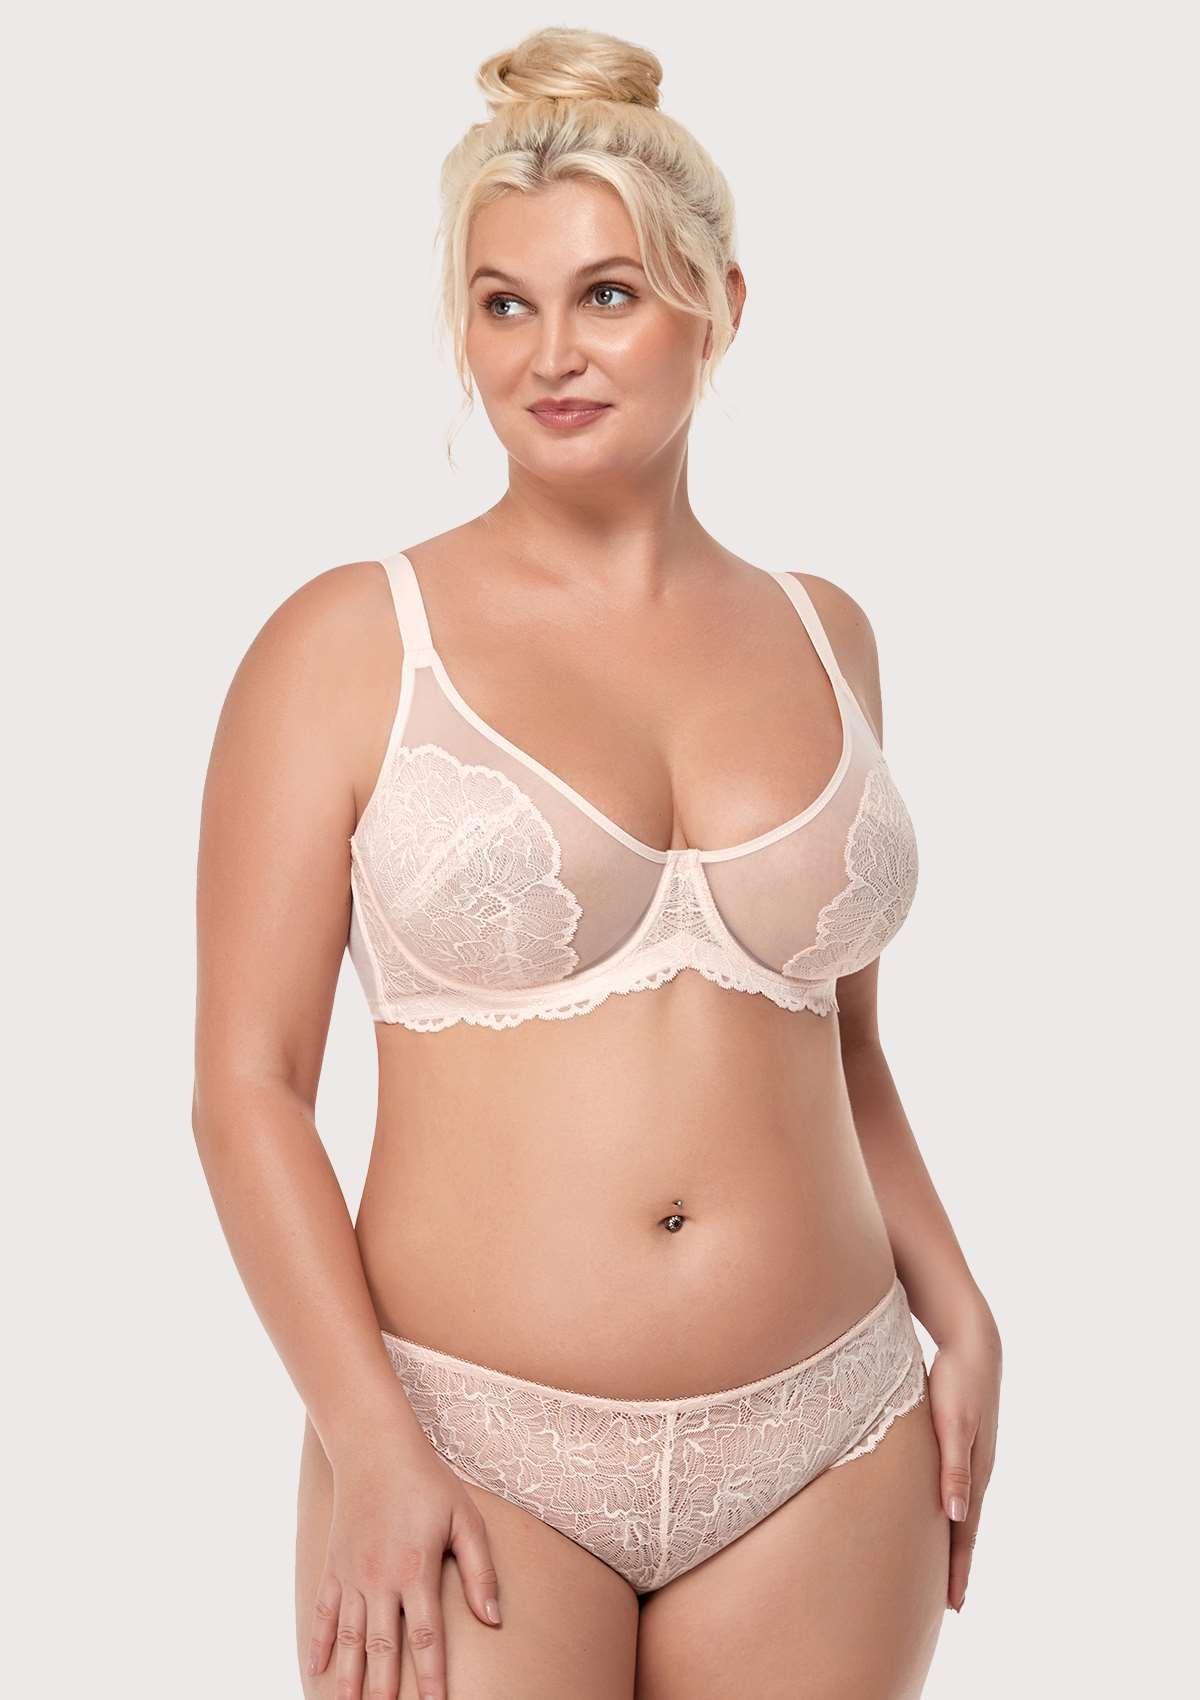 HSIA Blossom Matching Lacey Underwear And Bra Set: Sexy Lace Bra - Dusty Peach / 40 / G